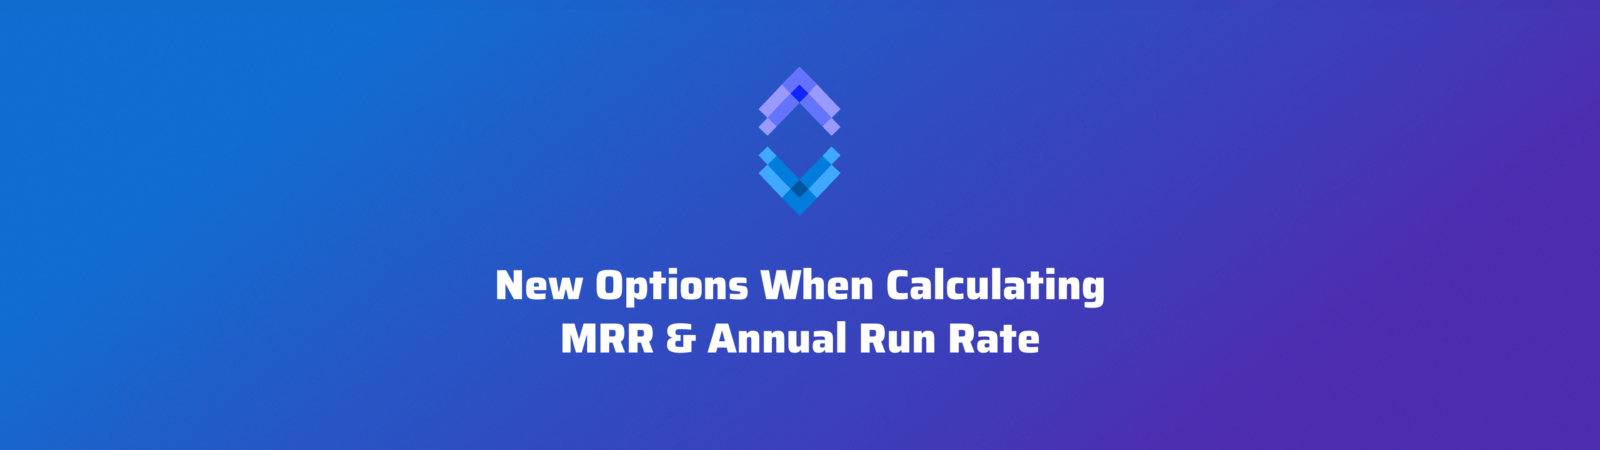 new-options-for-mrr-and-annual-run-rate1